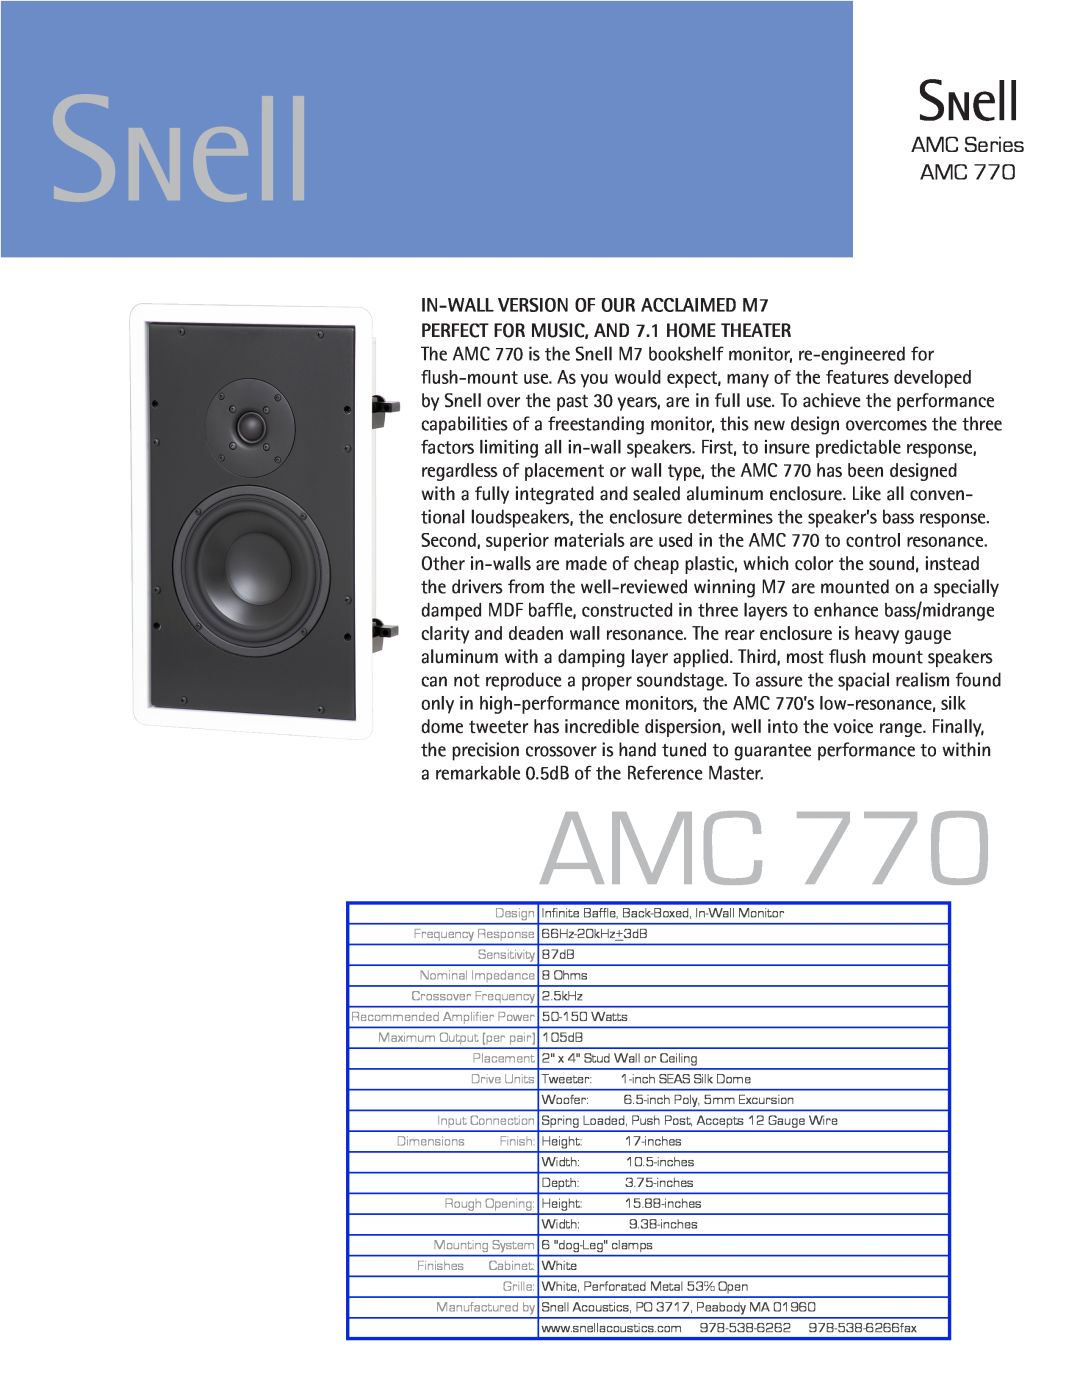 Snell Acoustics AMC 770 dimensions AMC Series AMC, IN-WALLVERSION OF OUR ACCLAIMED M7 